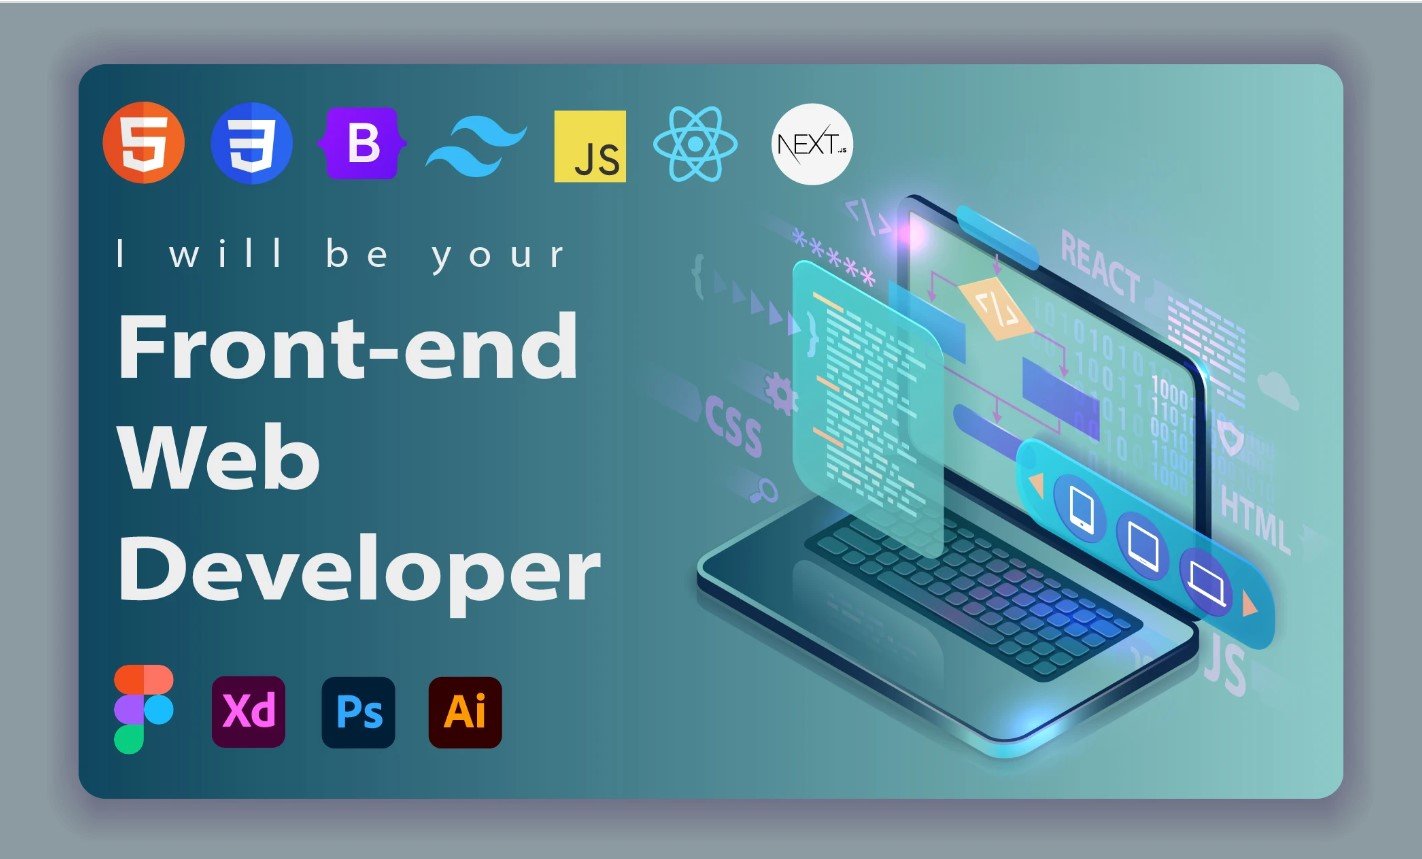 I will be your expert in website development with HTML CSS tailwind react next js